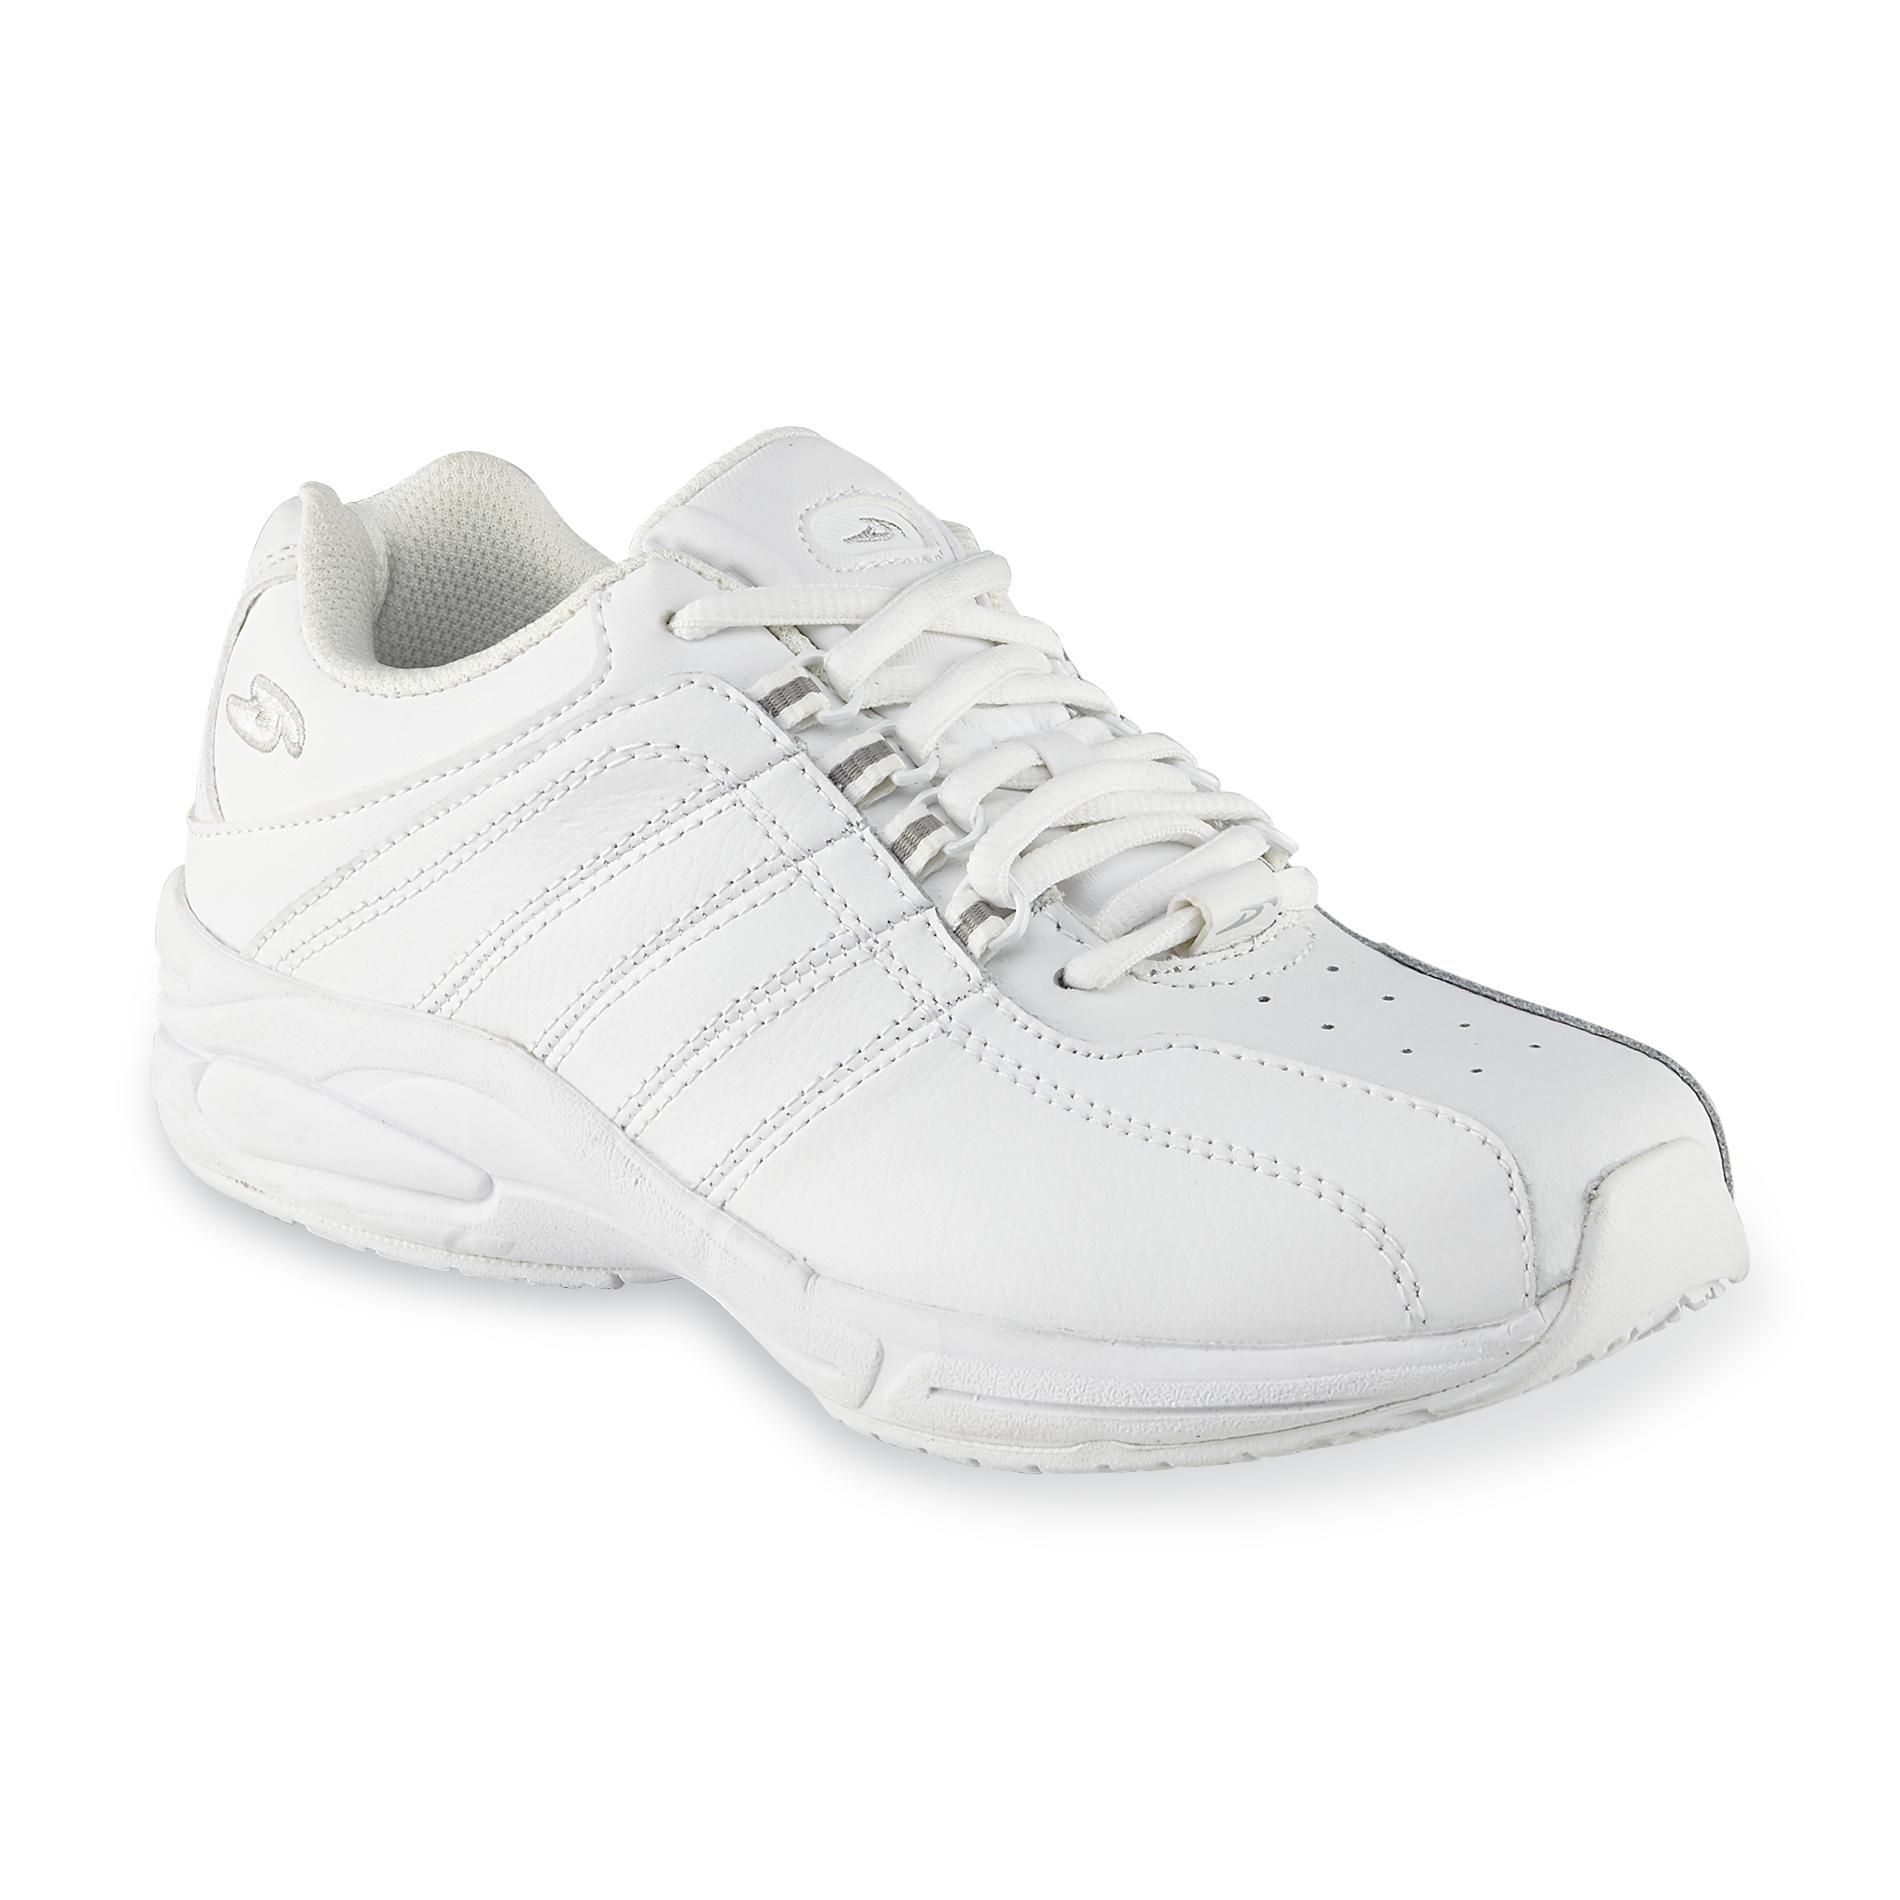 Dr. Scholl's Women's Kimberly Leather Slip Resistant Work Oxford - White Wide Width Avail